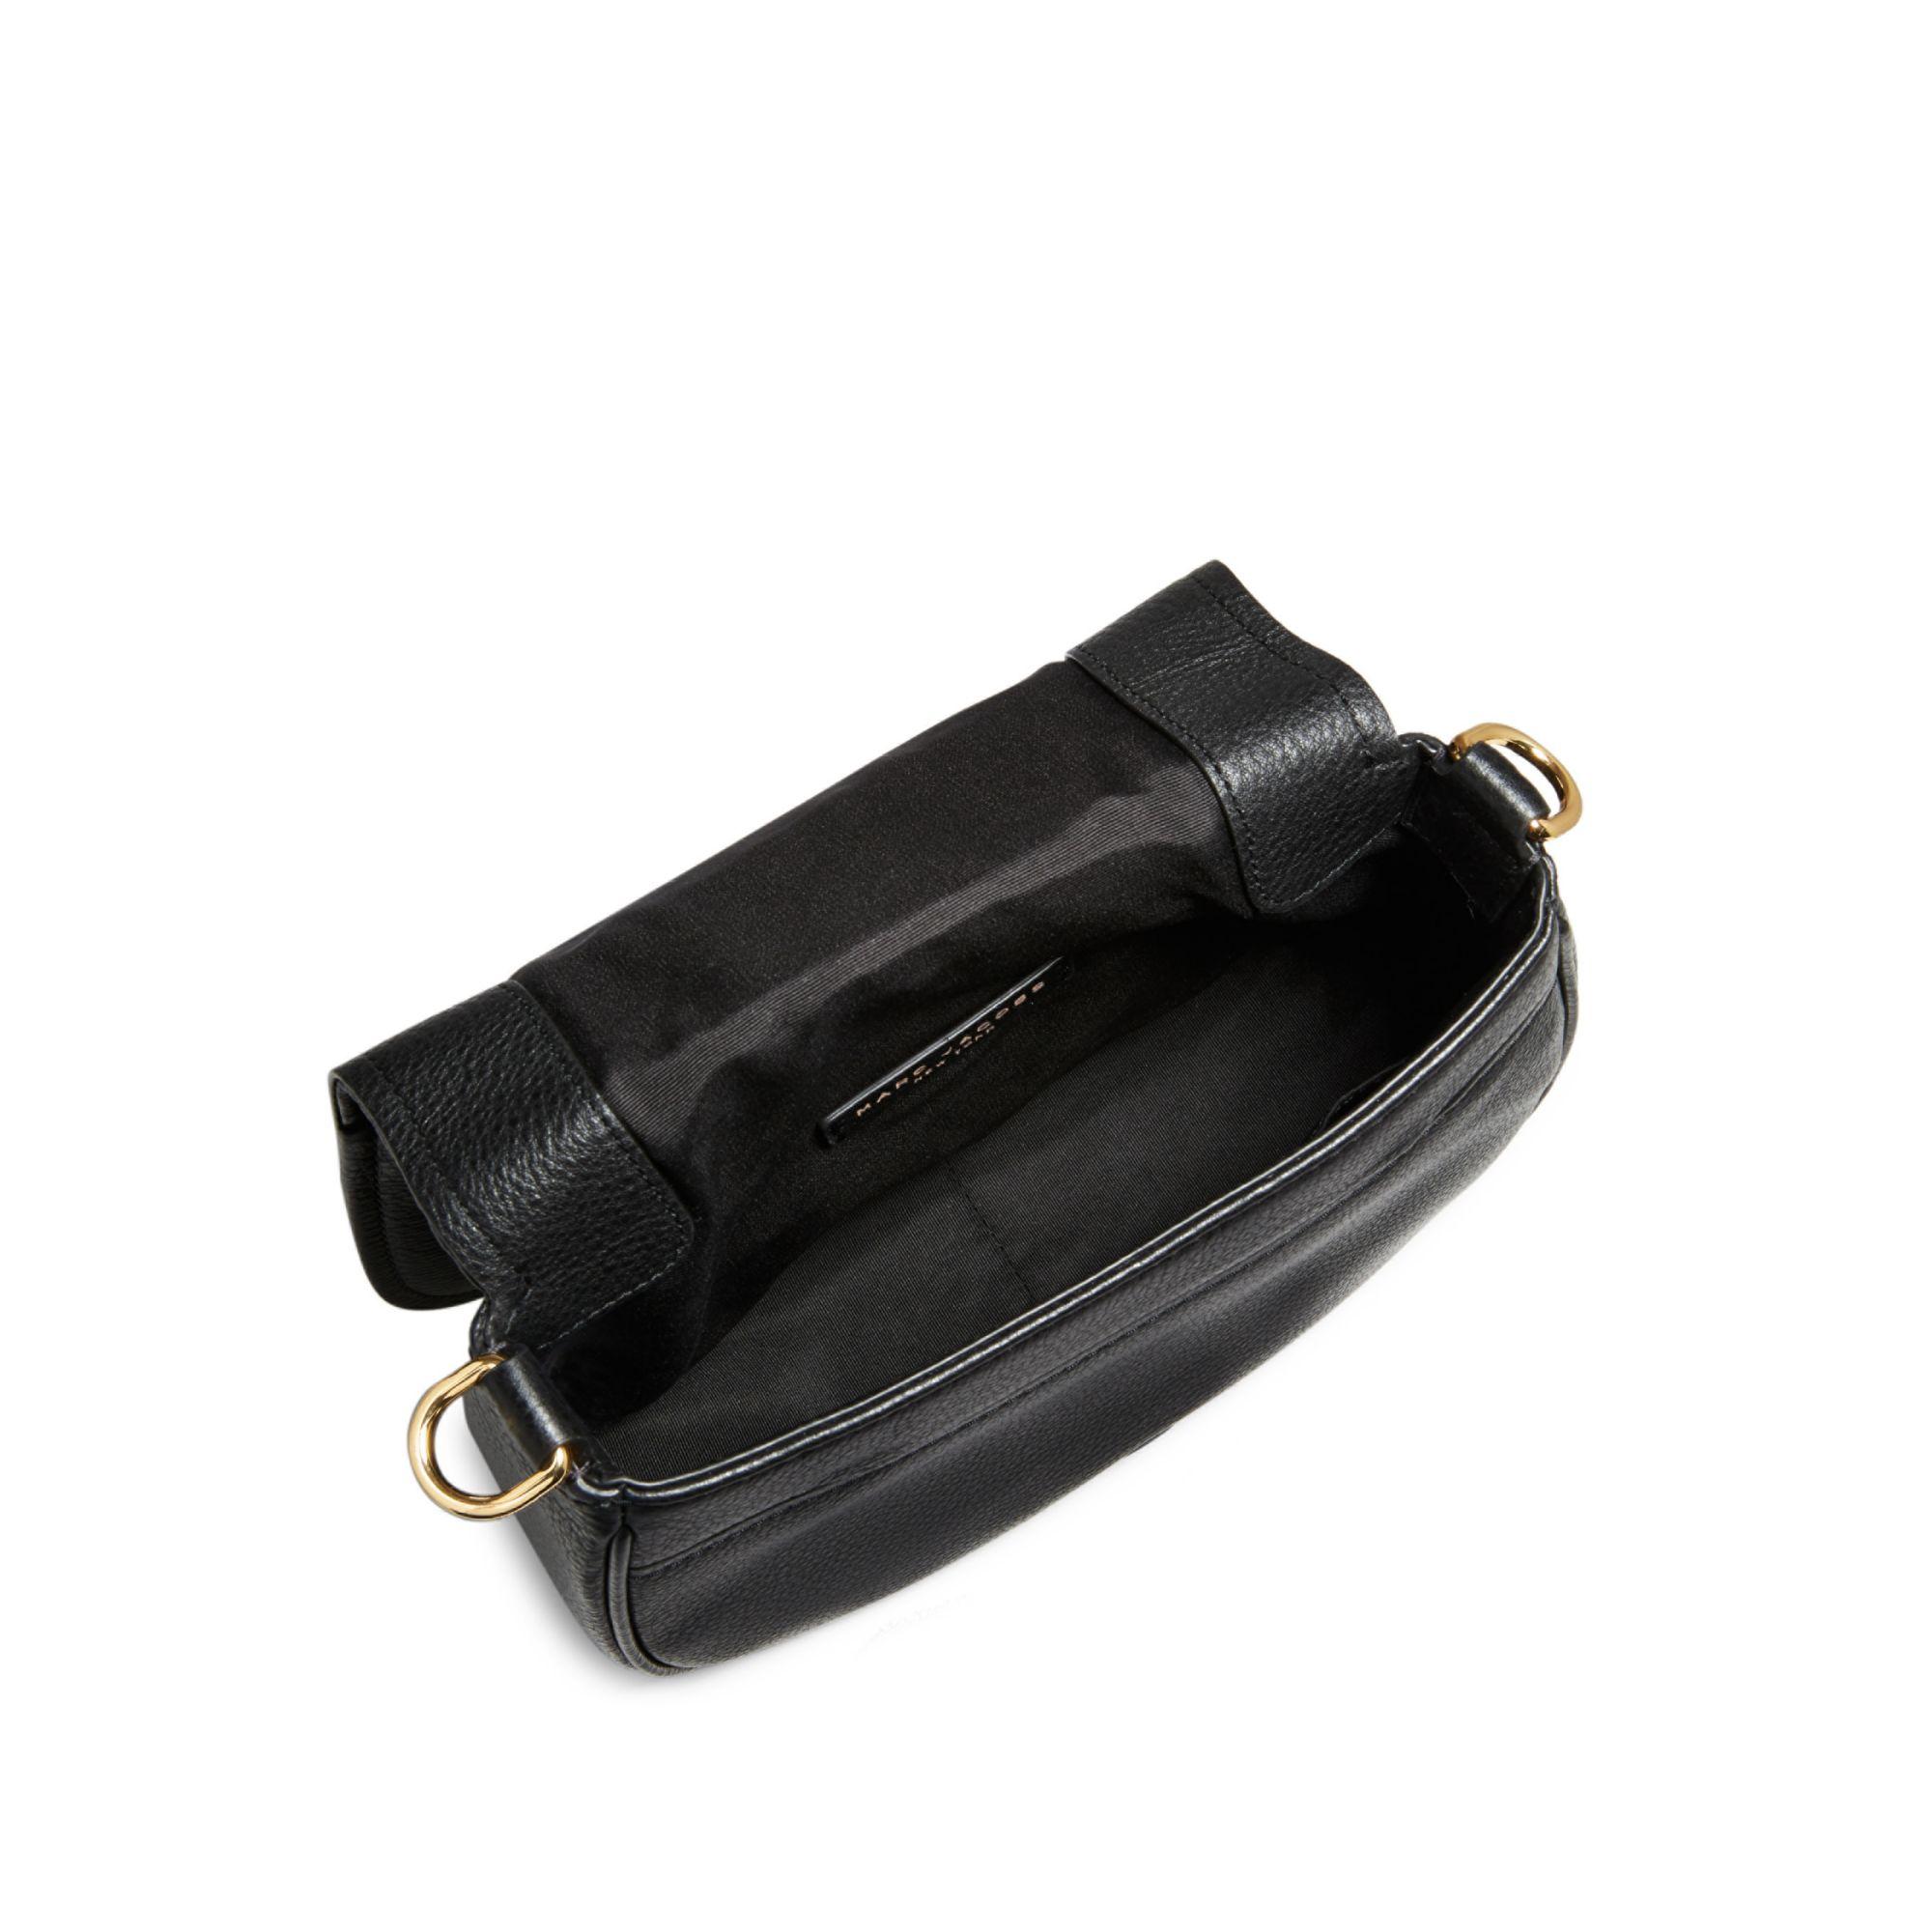 Marc Jacobs Pebbled Leather Mini Saddle Crossbody Bag in Black - Lyst